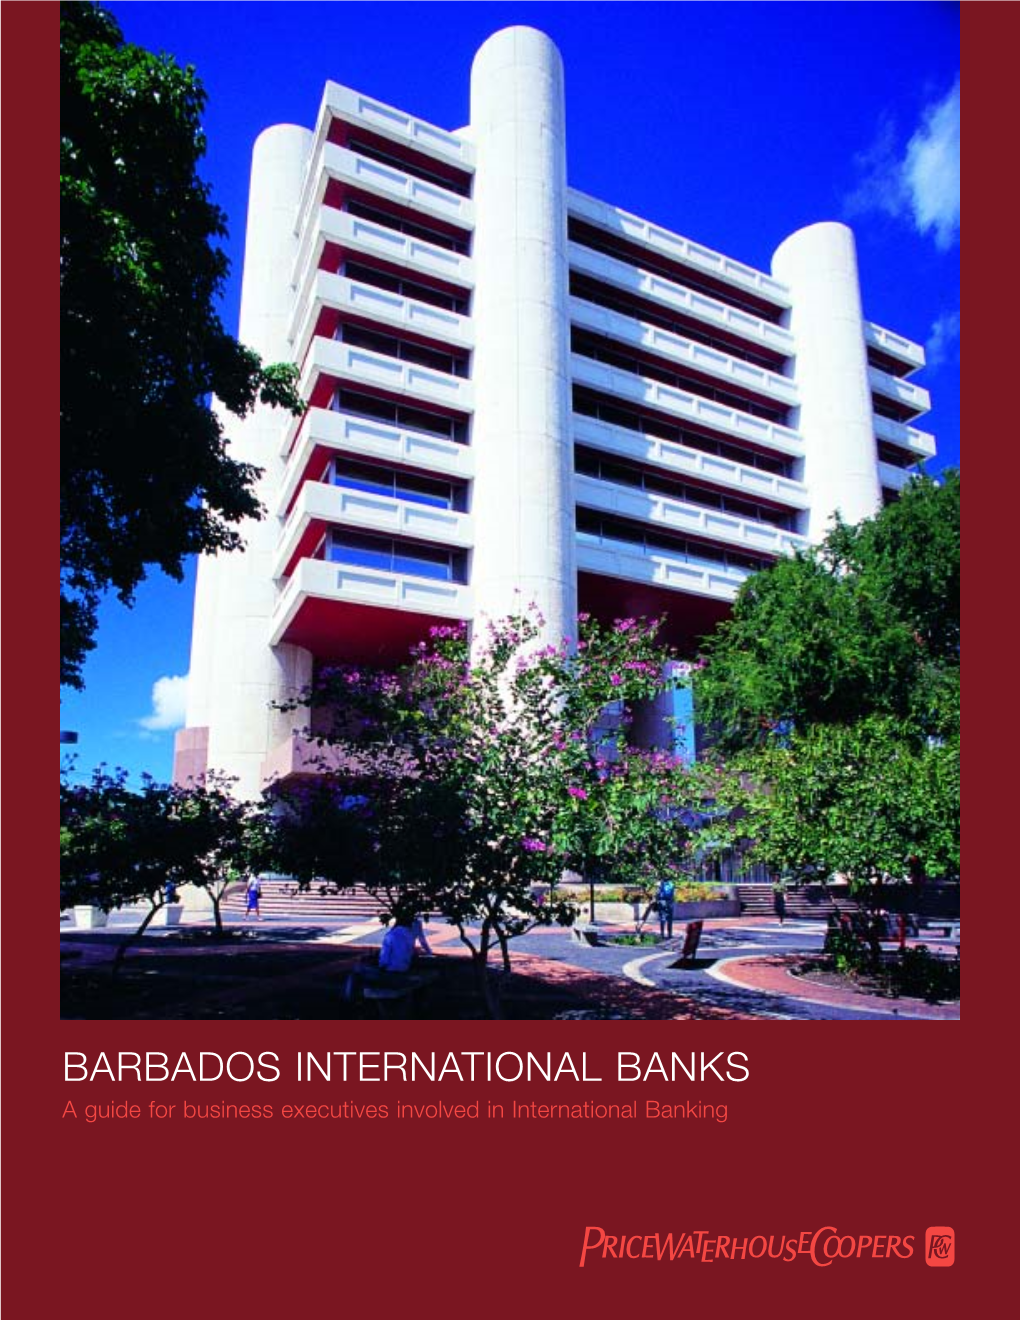 BARBADOS INTERNATIONAL BANKS a Guide for Business Executives Involved in International Banking